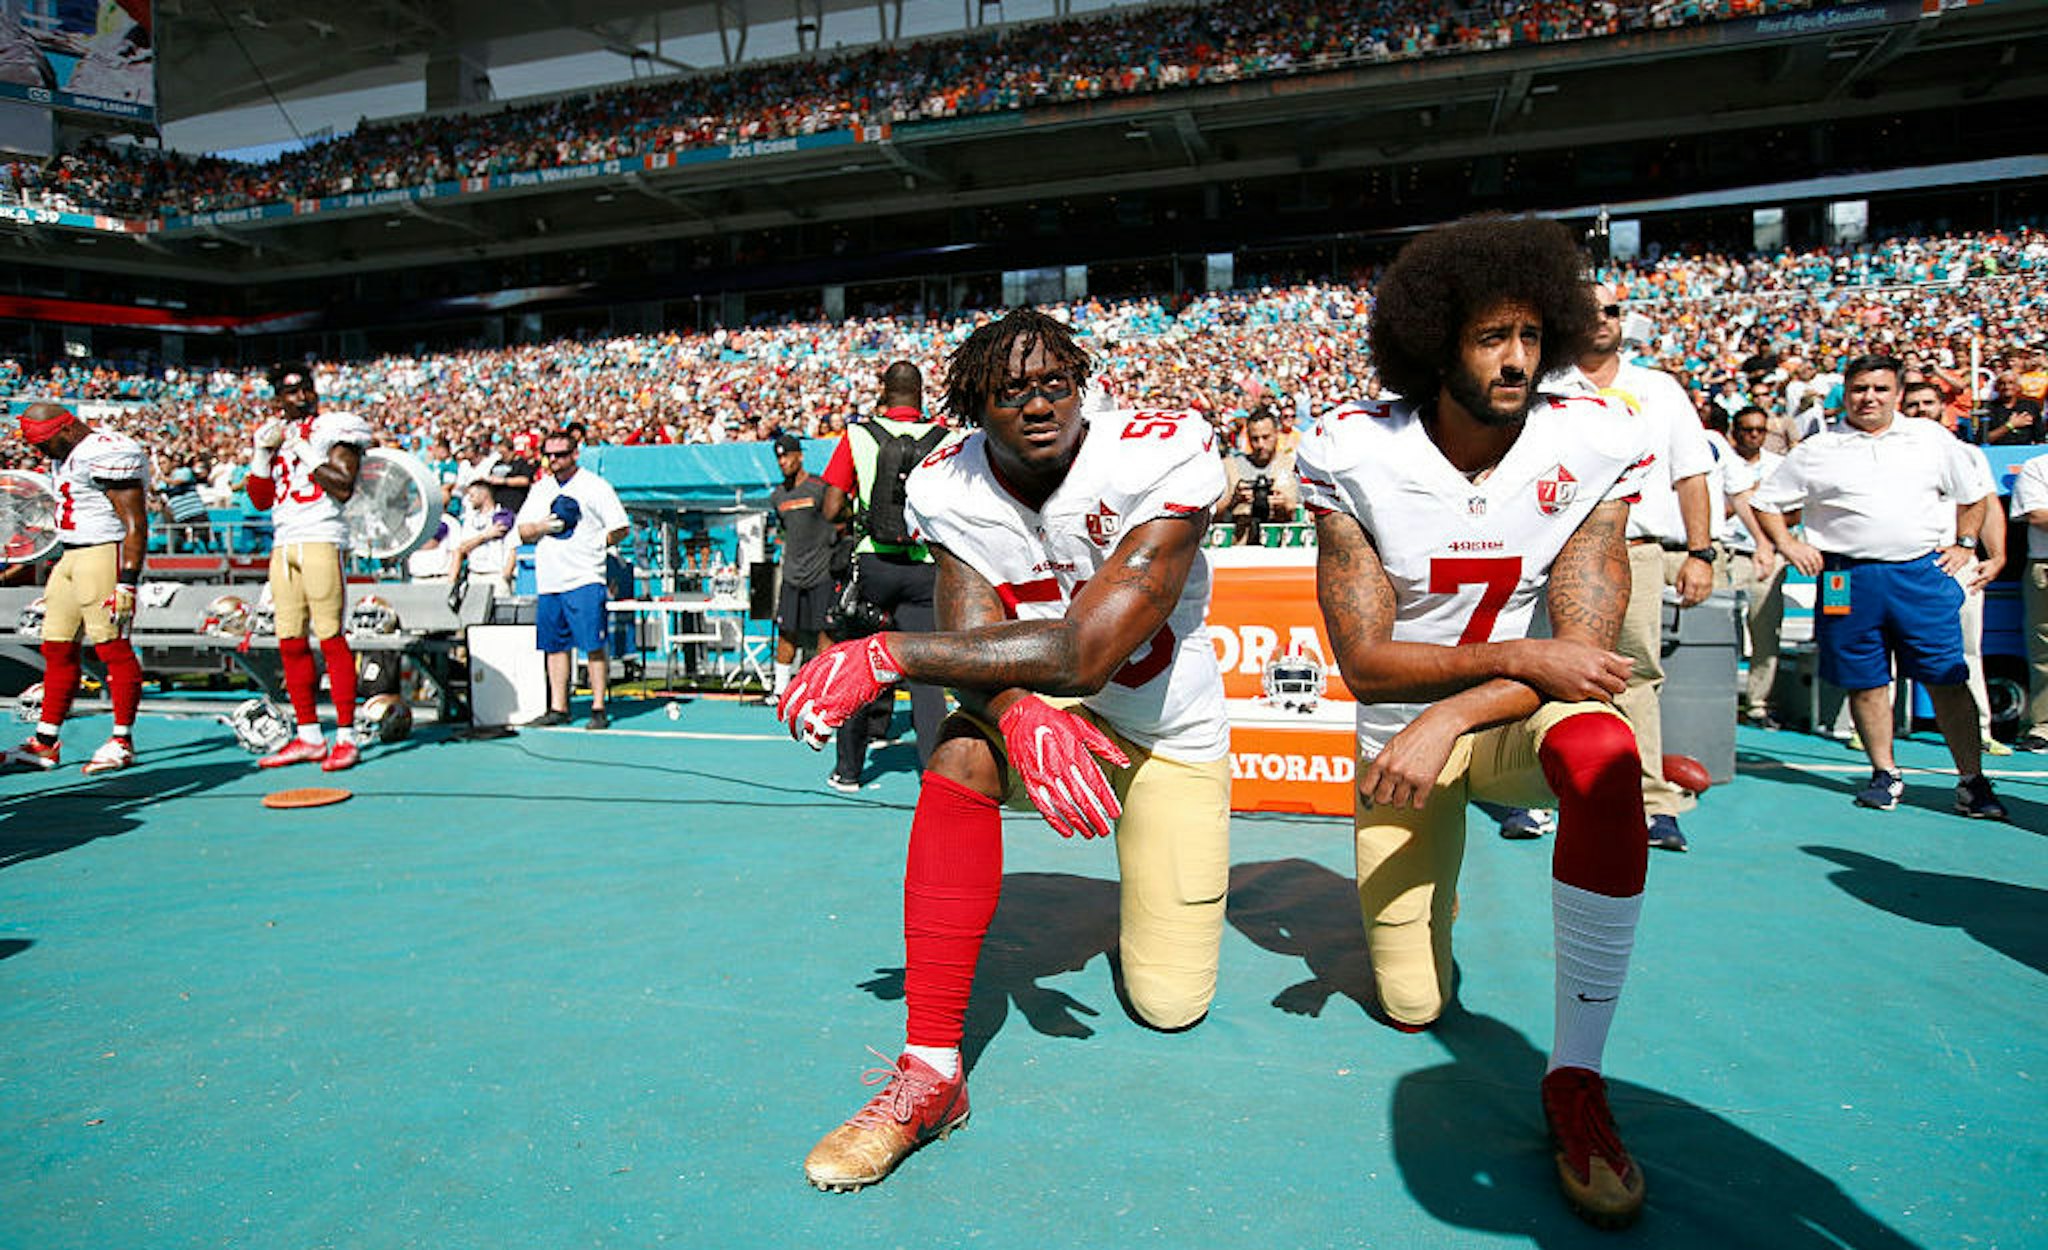 Eli Harold #58 and Colin Kaepernick #7 of the San Francisco 49ers kneel on the sideline, during the anthem, prior to the game against the Miami Dolphins at Hard Rock Stadium on November 27, 2016 in Miami Gardens, Florida. The Dolphins defeated the 49ers 31-24. (Photo by Michael Zagaris/San Francisco 49ers/Getty Images)